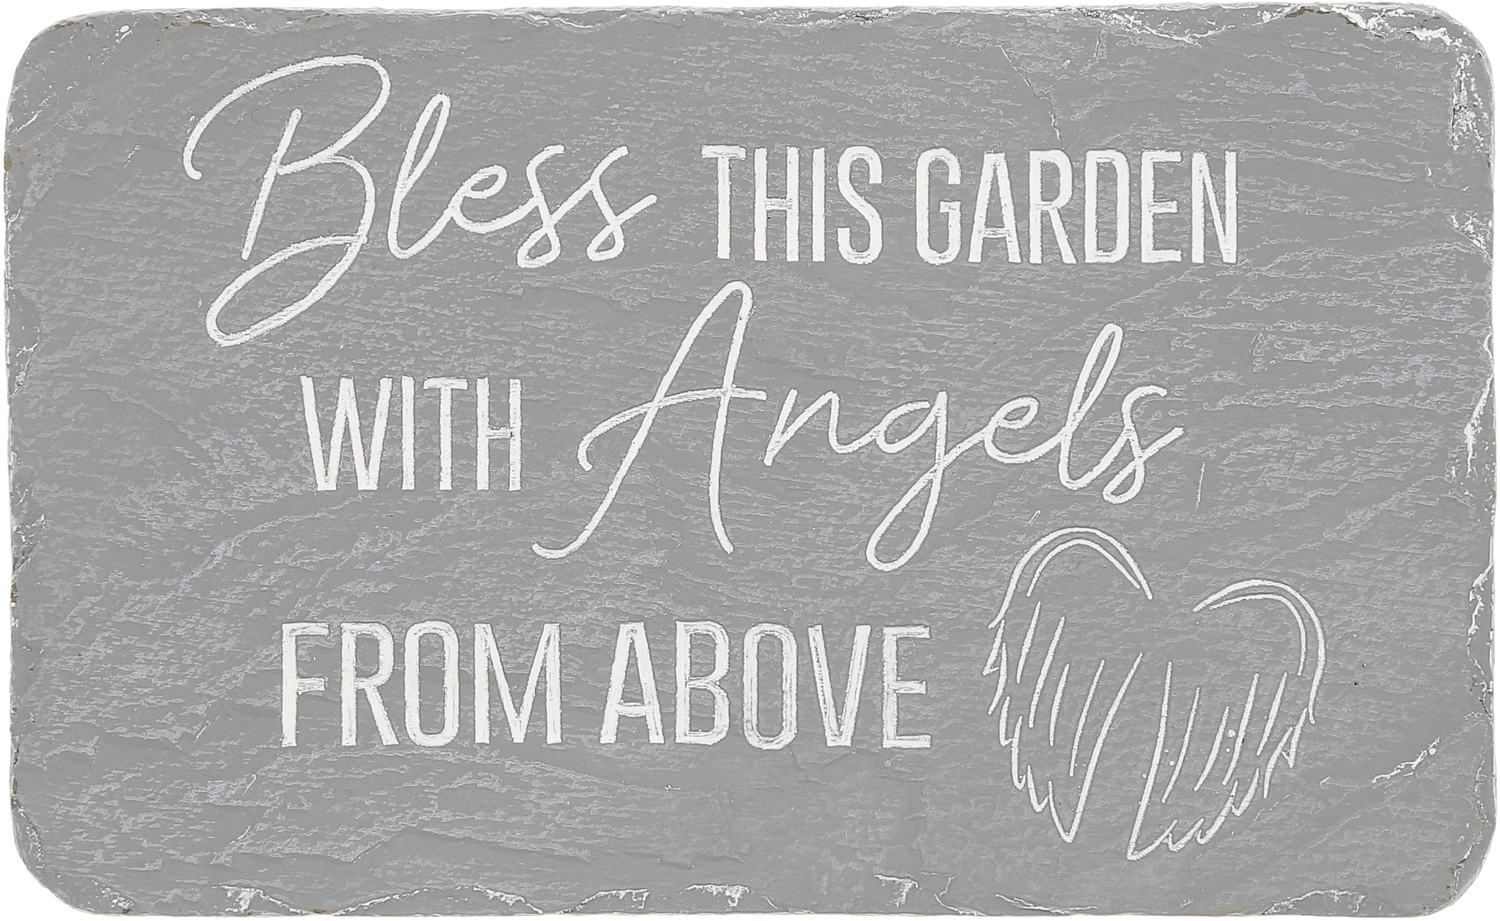 Angels from Above by Stones with Stories - Angels from Above - 7" x 4.25" Garden Stone